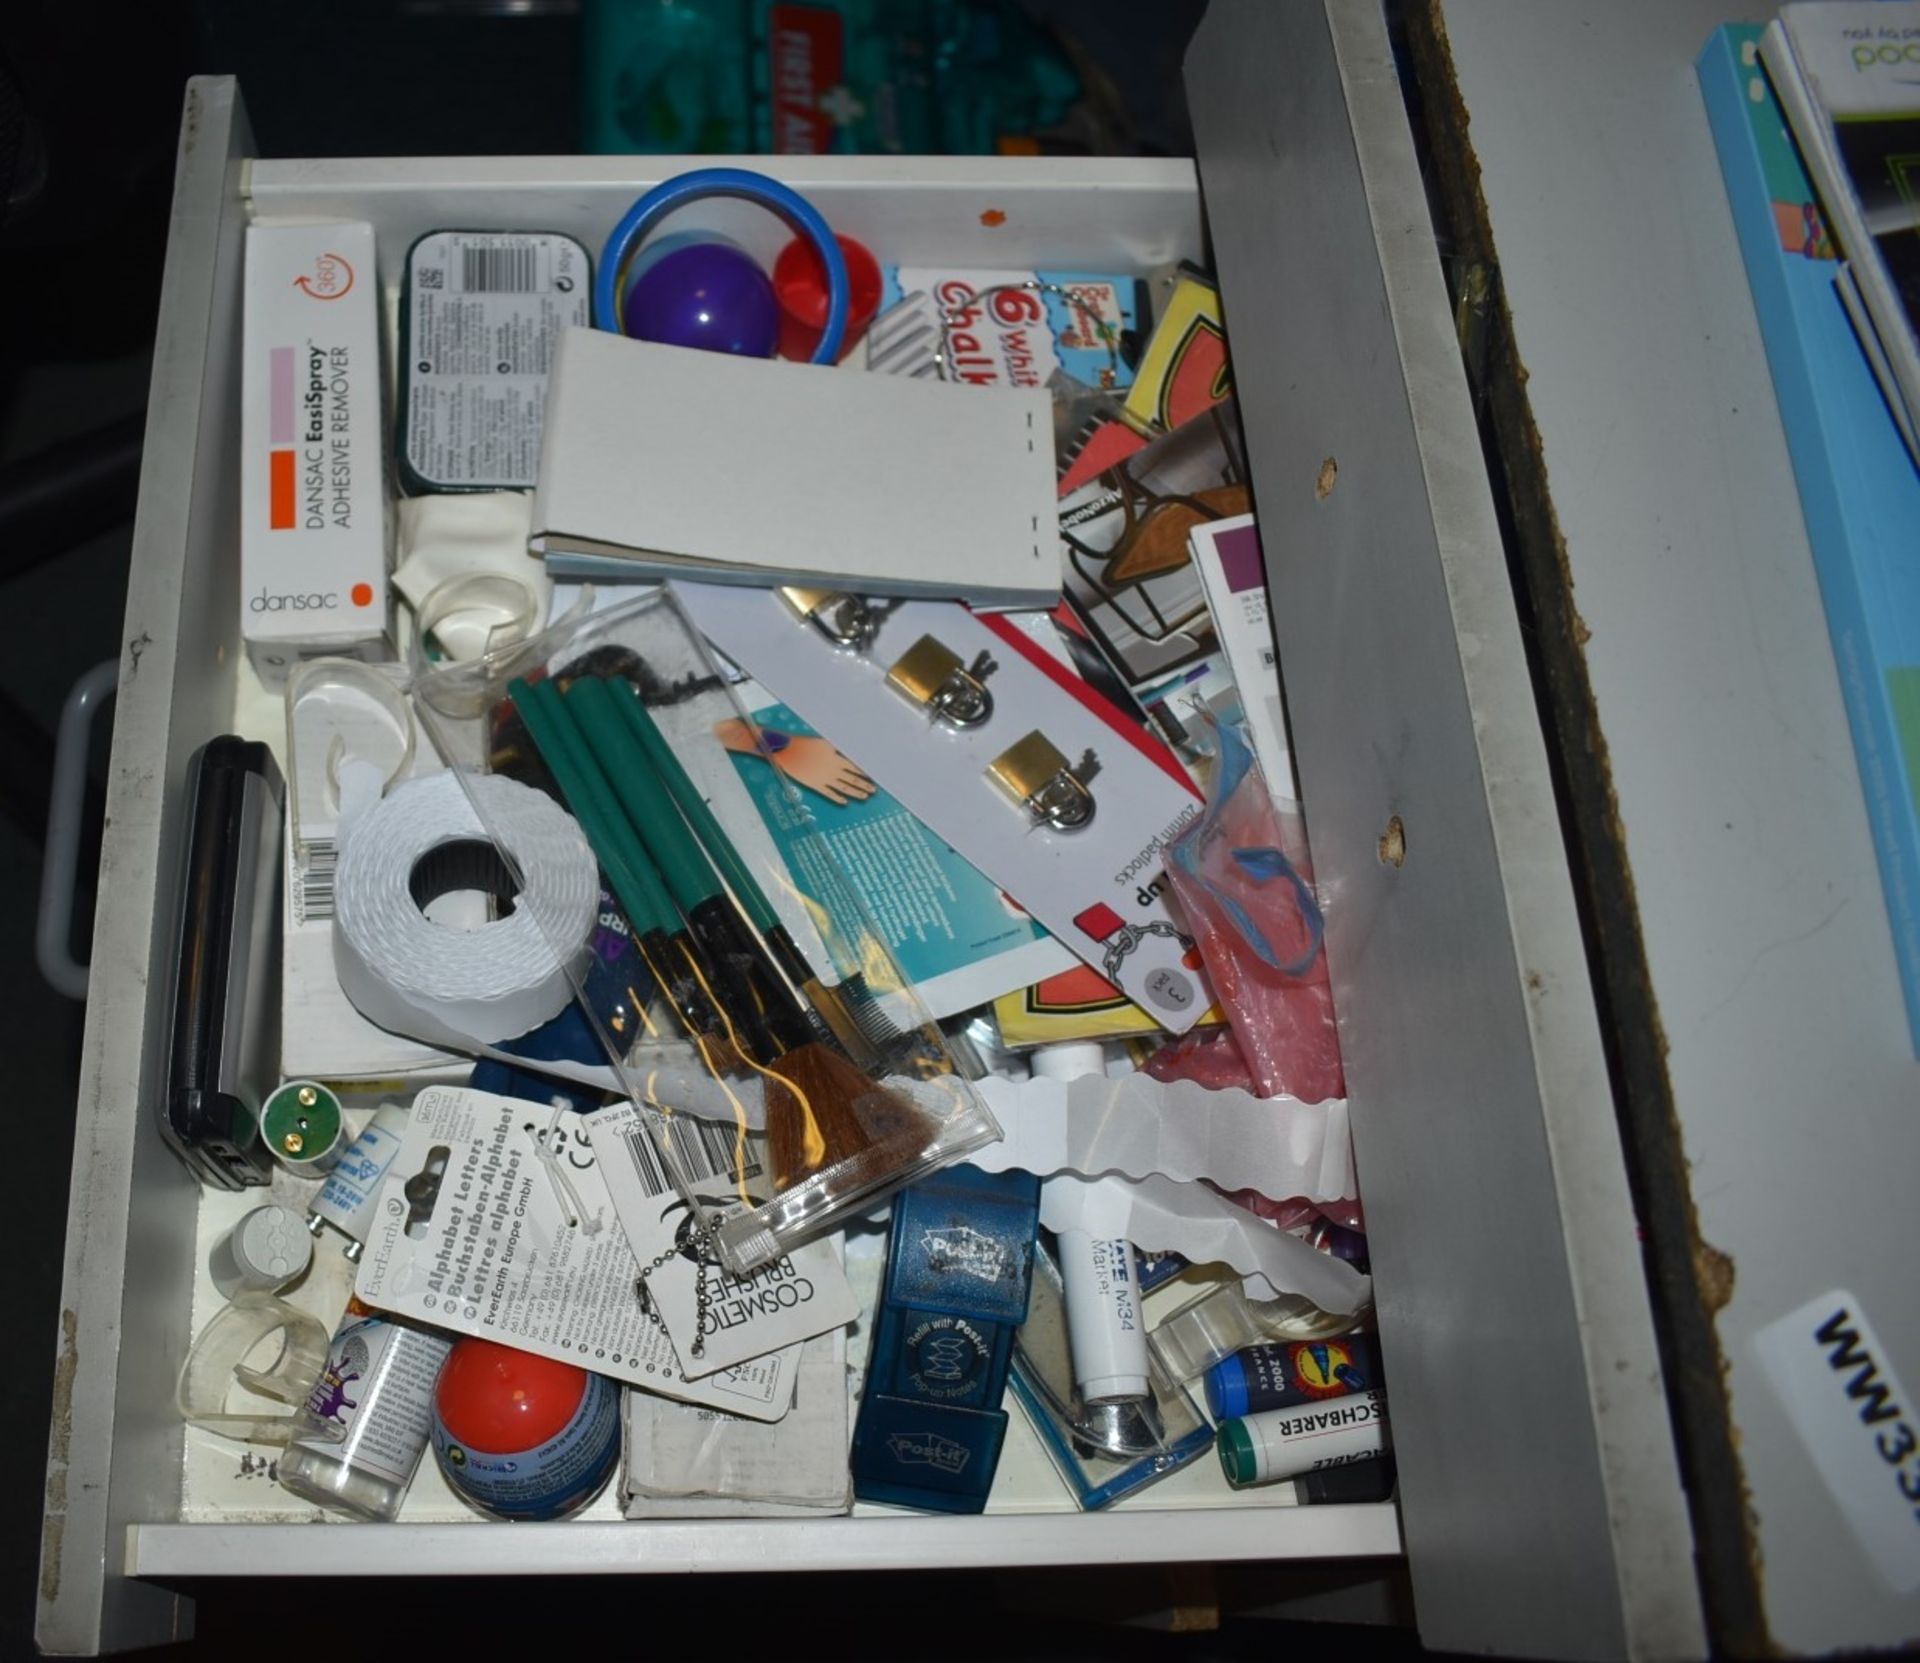 Assorted Job Lot From Office Room - Includes Stationary, Contents of Drawers, First Aid Kit, Party - Image 13 of 21